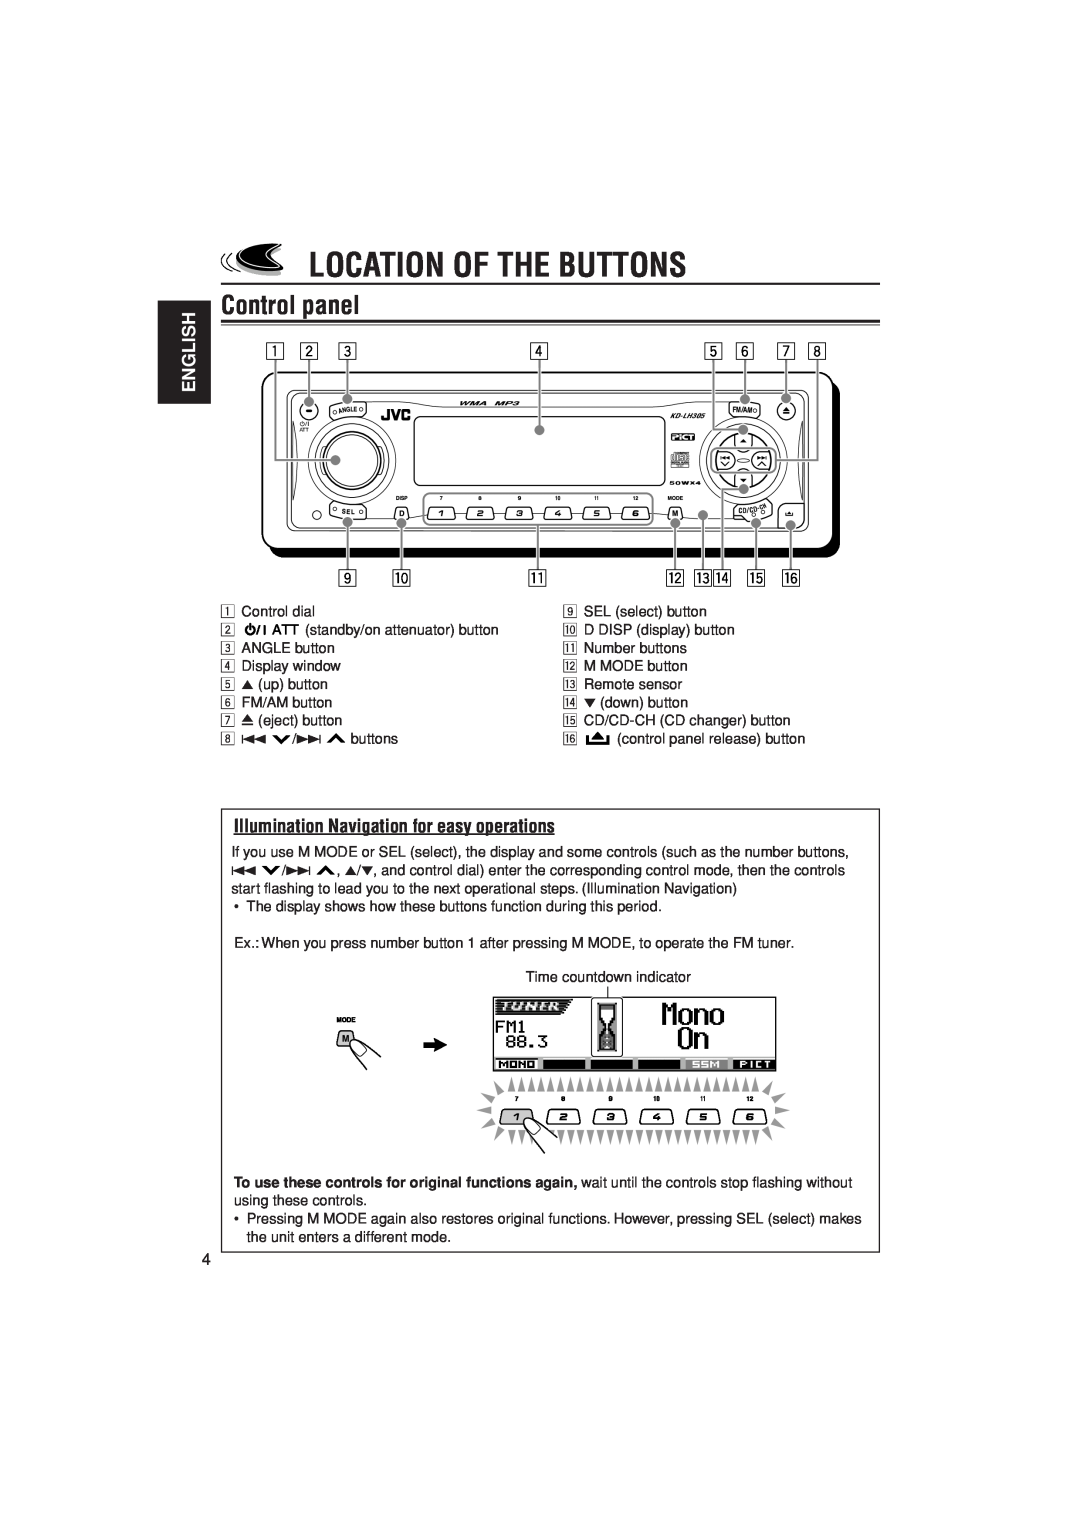 JVC KD-LH305 manual Location Of The Buttons, Control panel, w er t y, English, Illumination Navigation for easy operations 